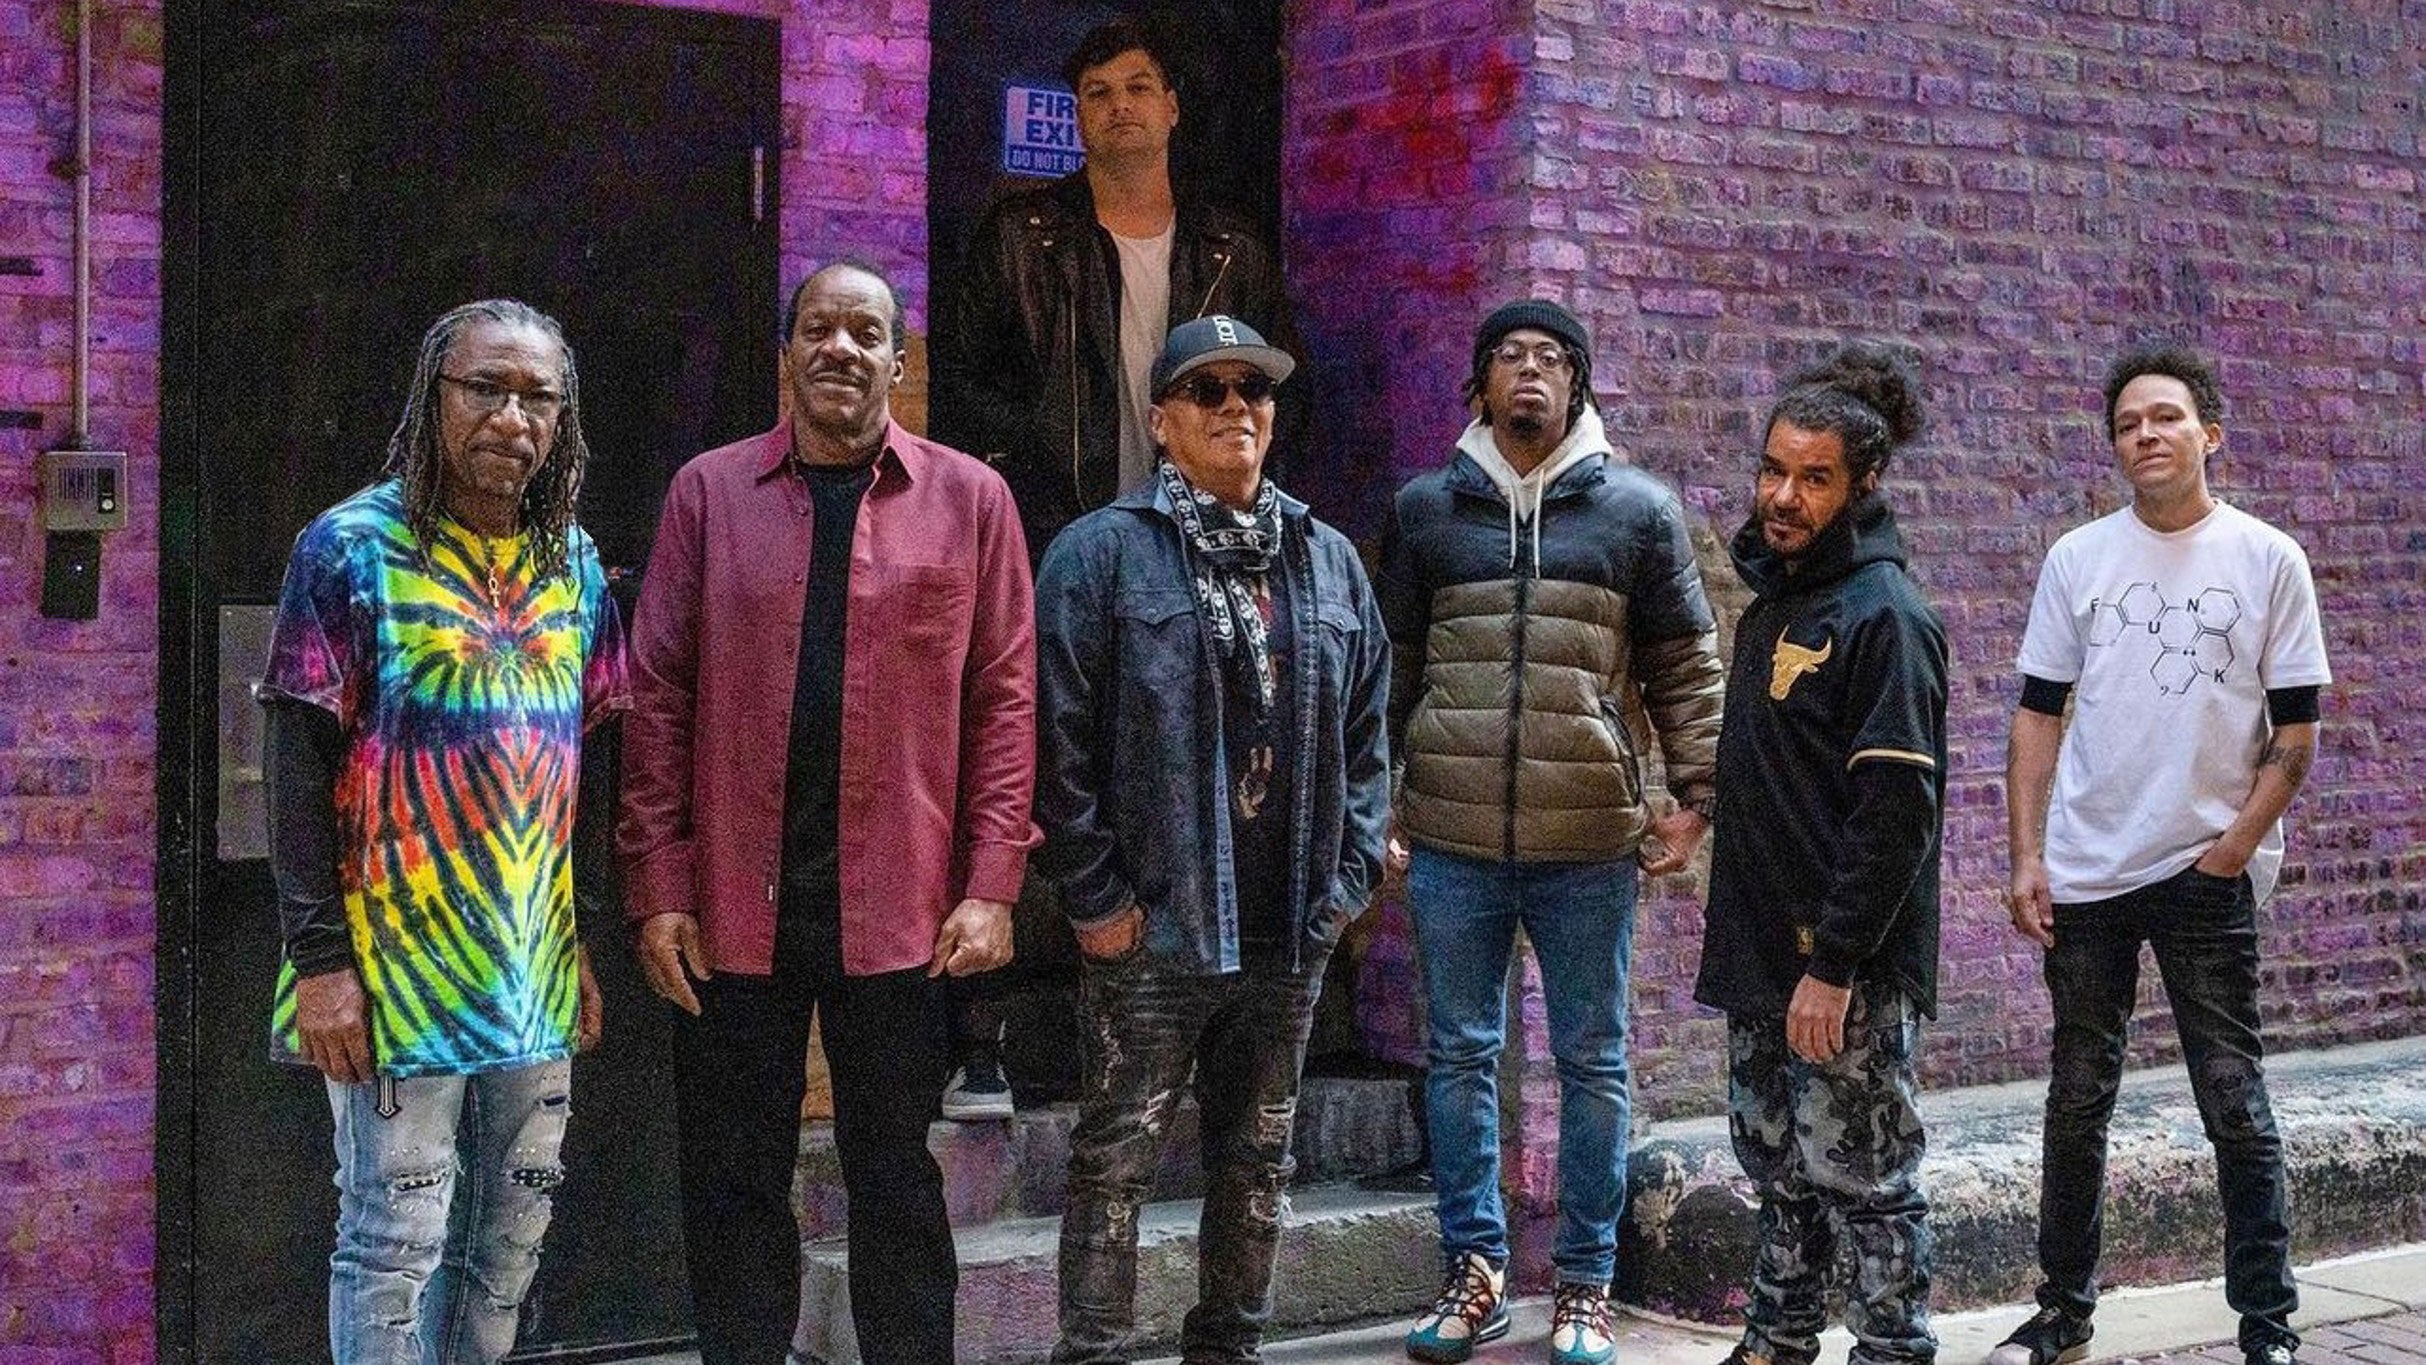 Official Tedeschi Trucks Band After Party featuring Dumpstaphunk in Atlantic City promo photo for Live Nation presale offer code